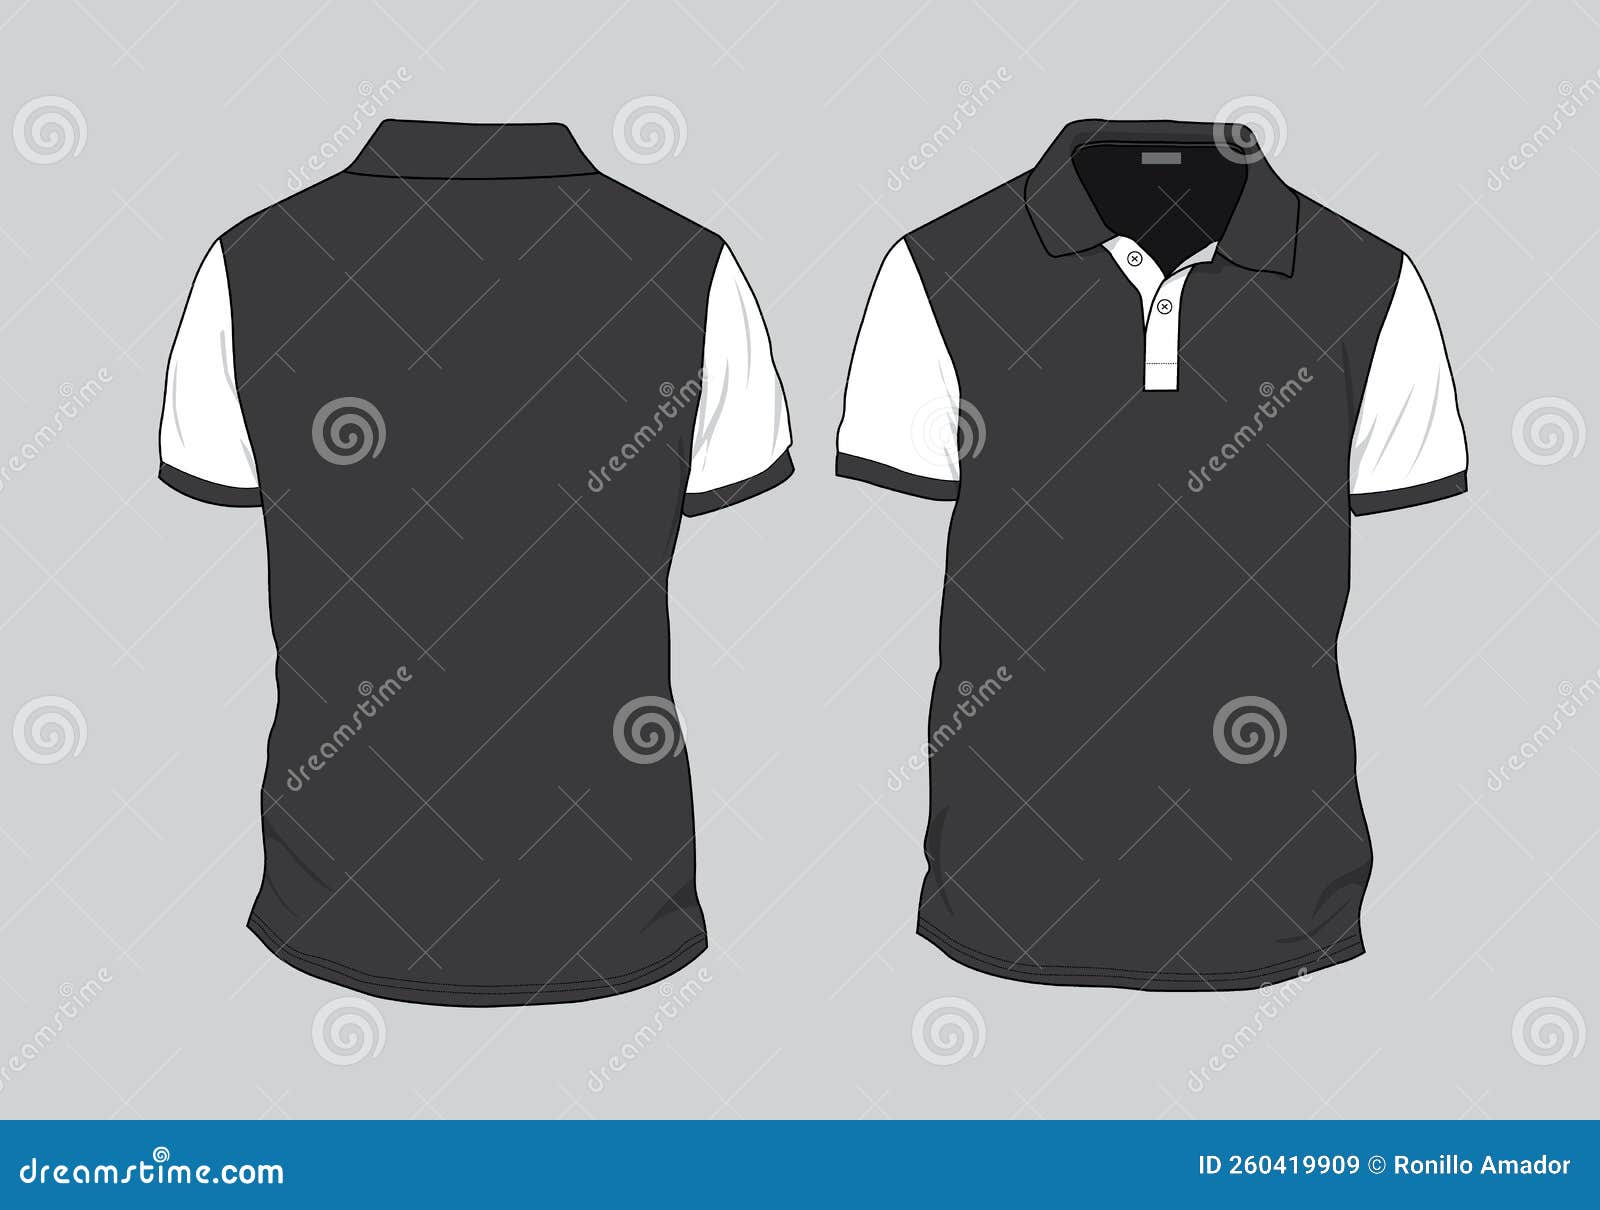 Polo Shirt Template Design Mockup Stock Vector - Illustration of casual ...